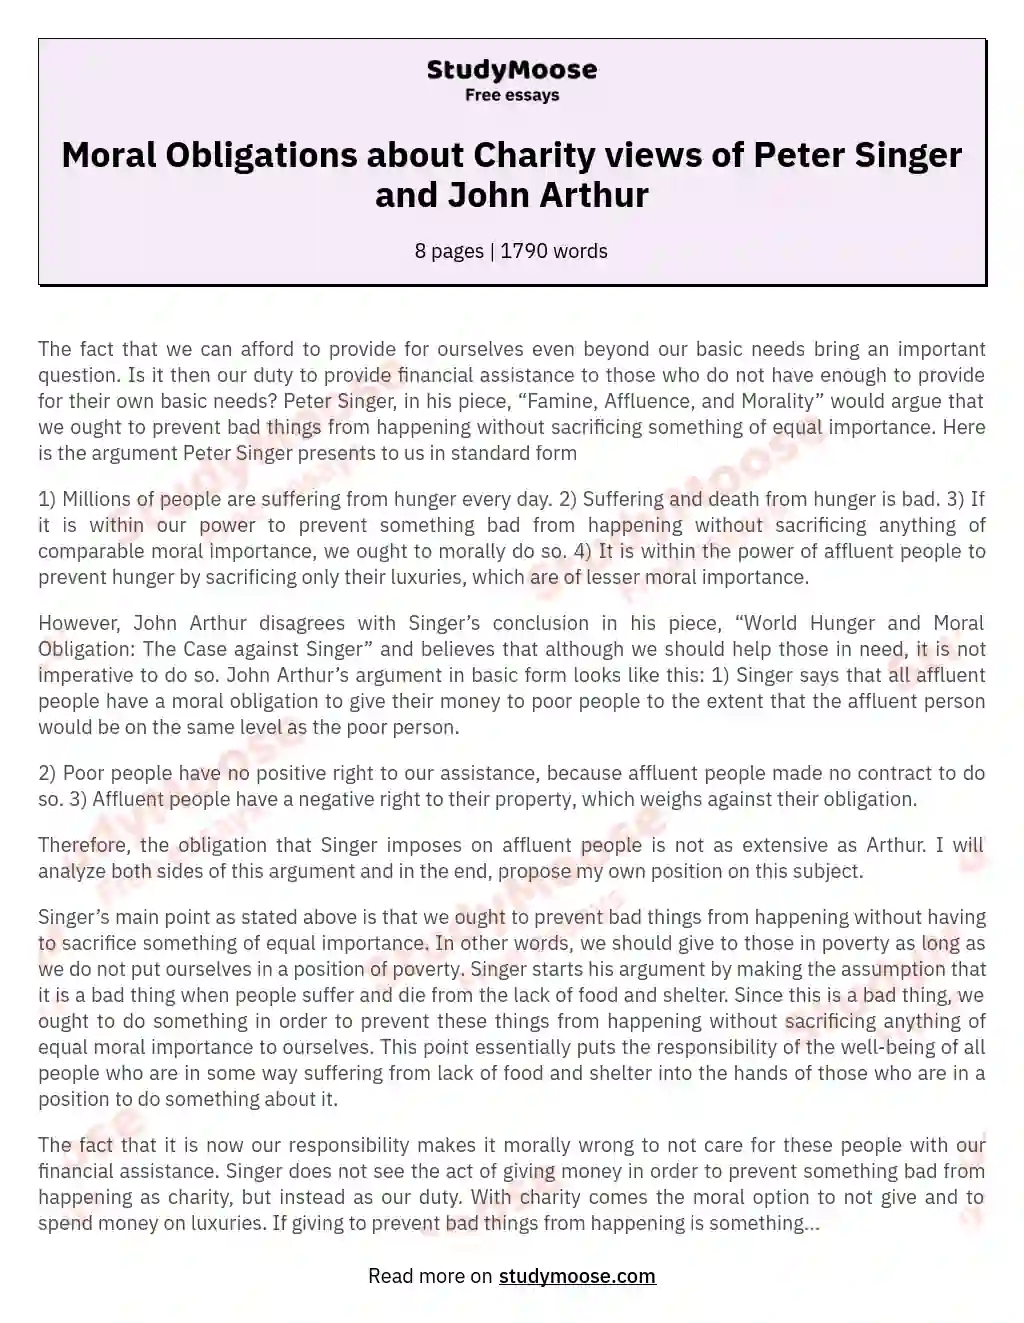 Moral Obligations about Charity views of Peter Singer and John Arthur